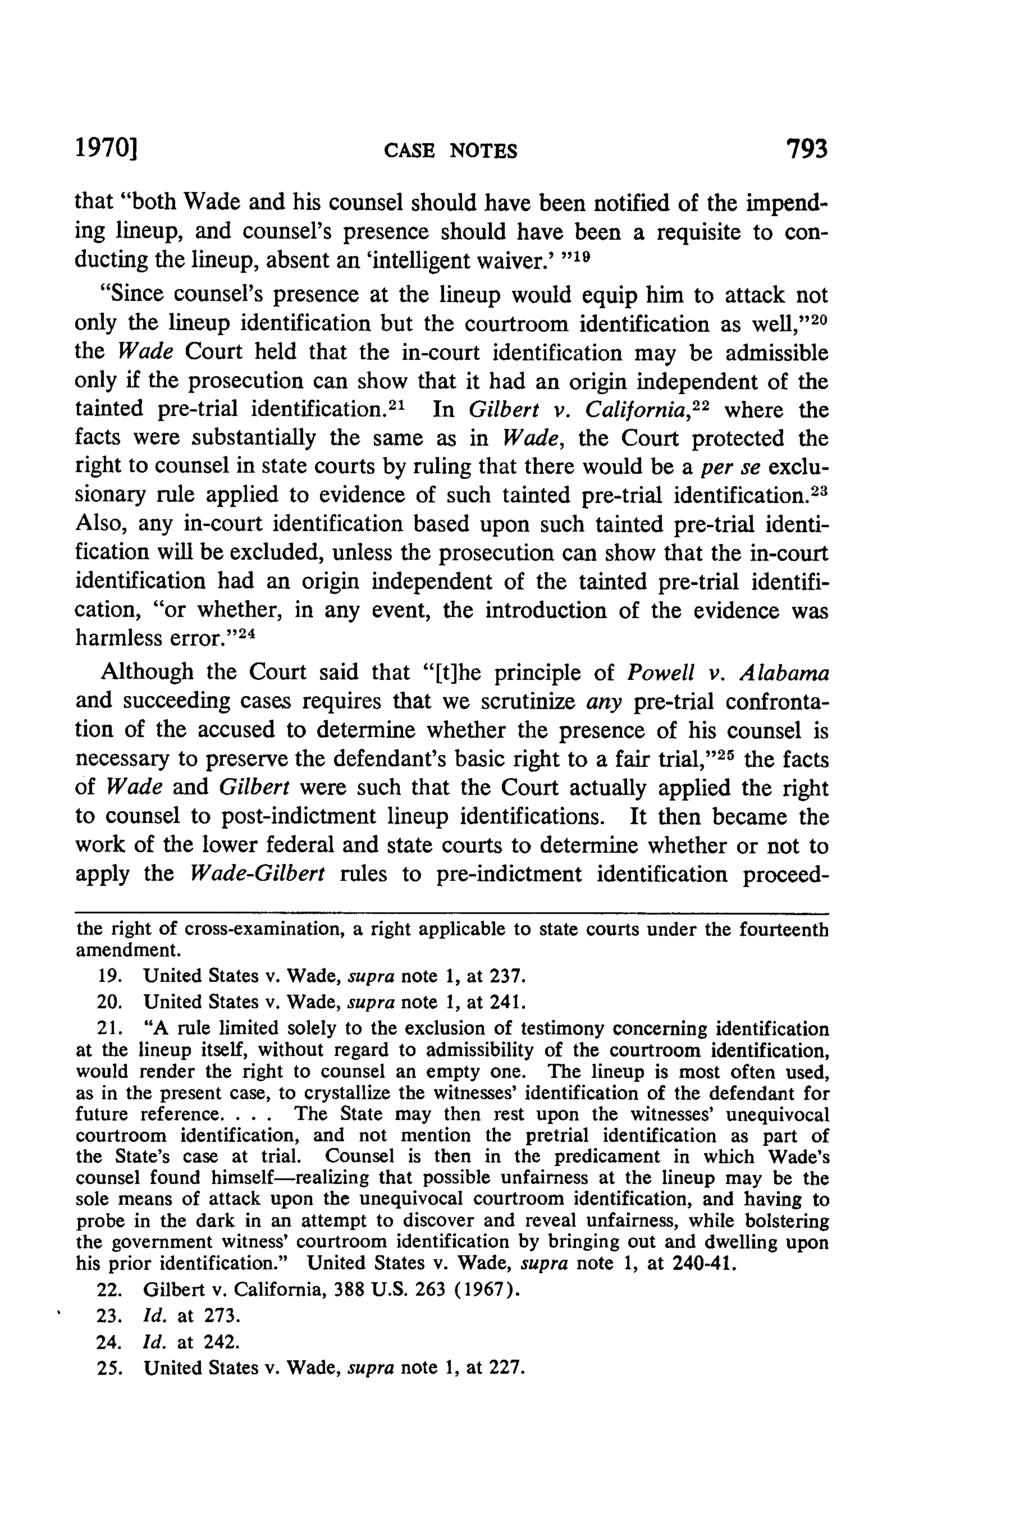 1970] CASE NOTES 793 that "both Wade and his counsel should have been notified of the impending lineup, and counsel's presence should have been a requisite to conducting the lineup, absent an